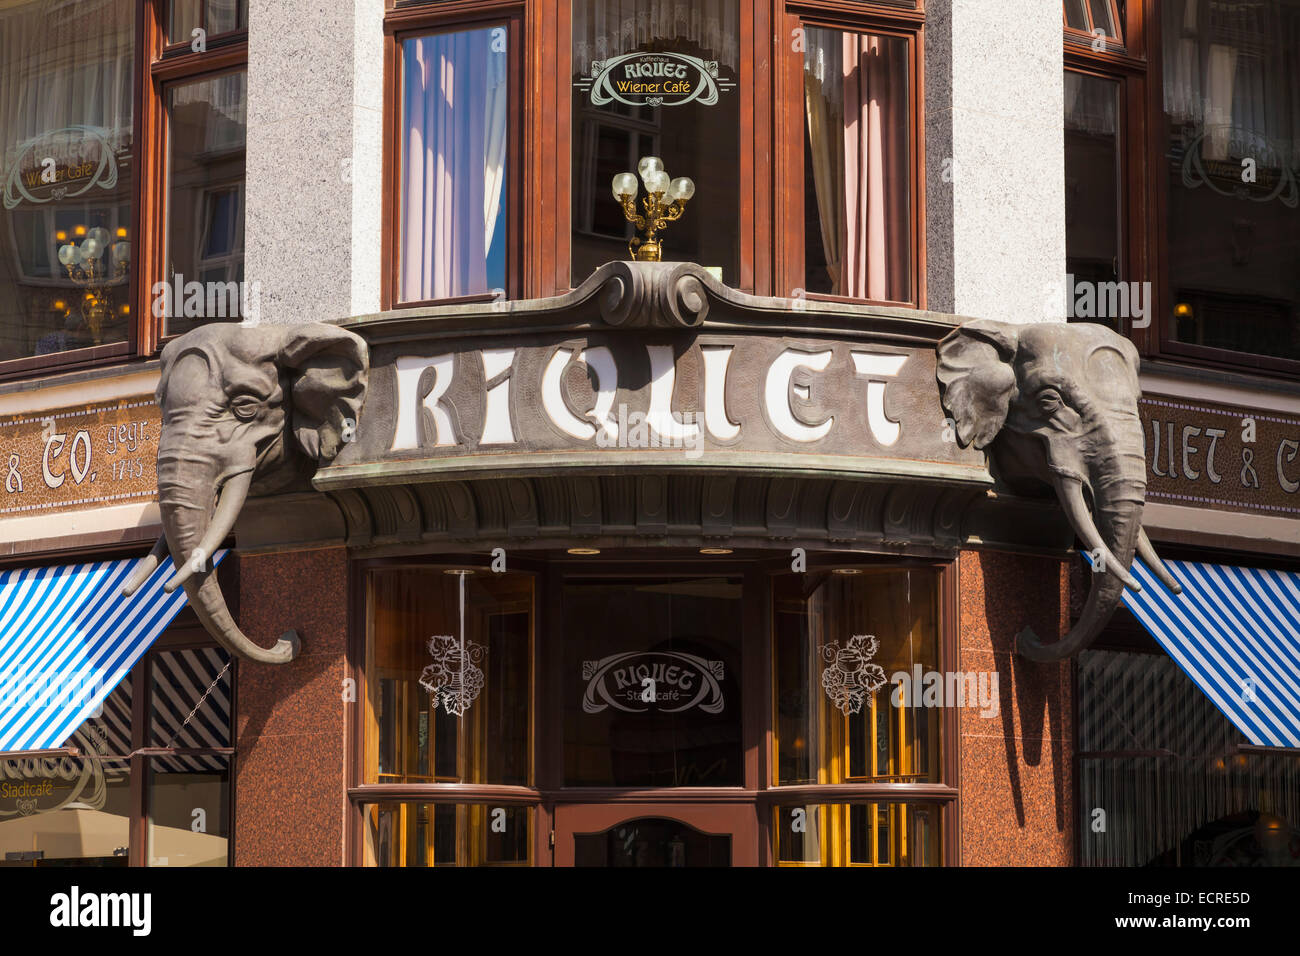 ENTRANCE OF THE RIQUETHAUS, RIQUET CAFE, COFFEE HOUSE, LEIPZIG, SAXONY, GERMANY Stock Photo